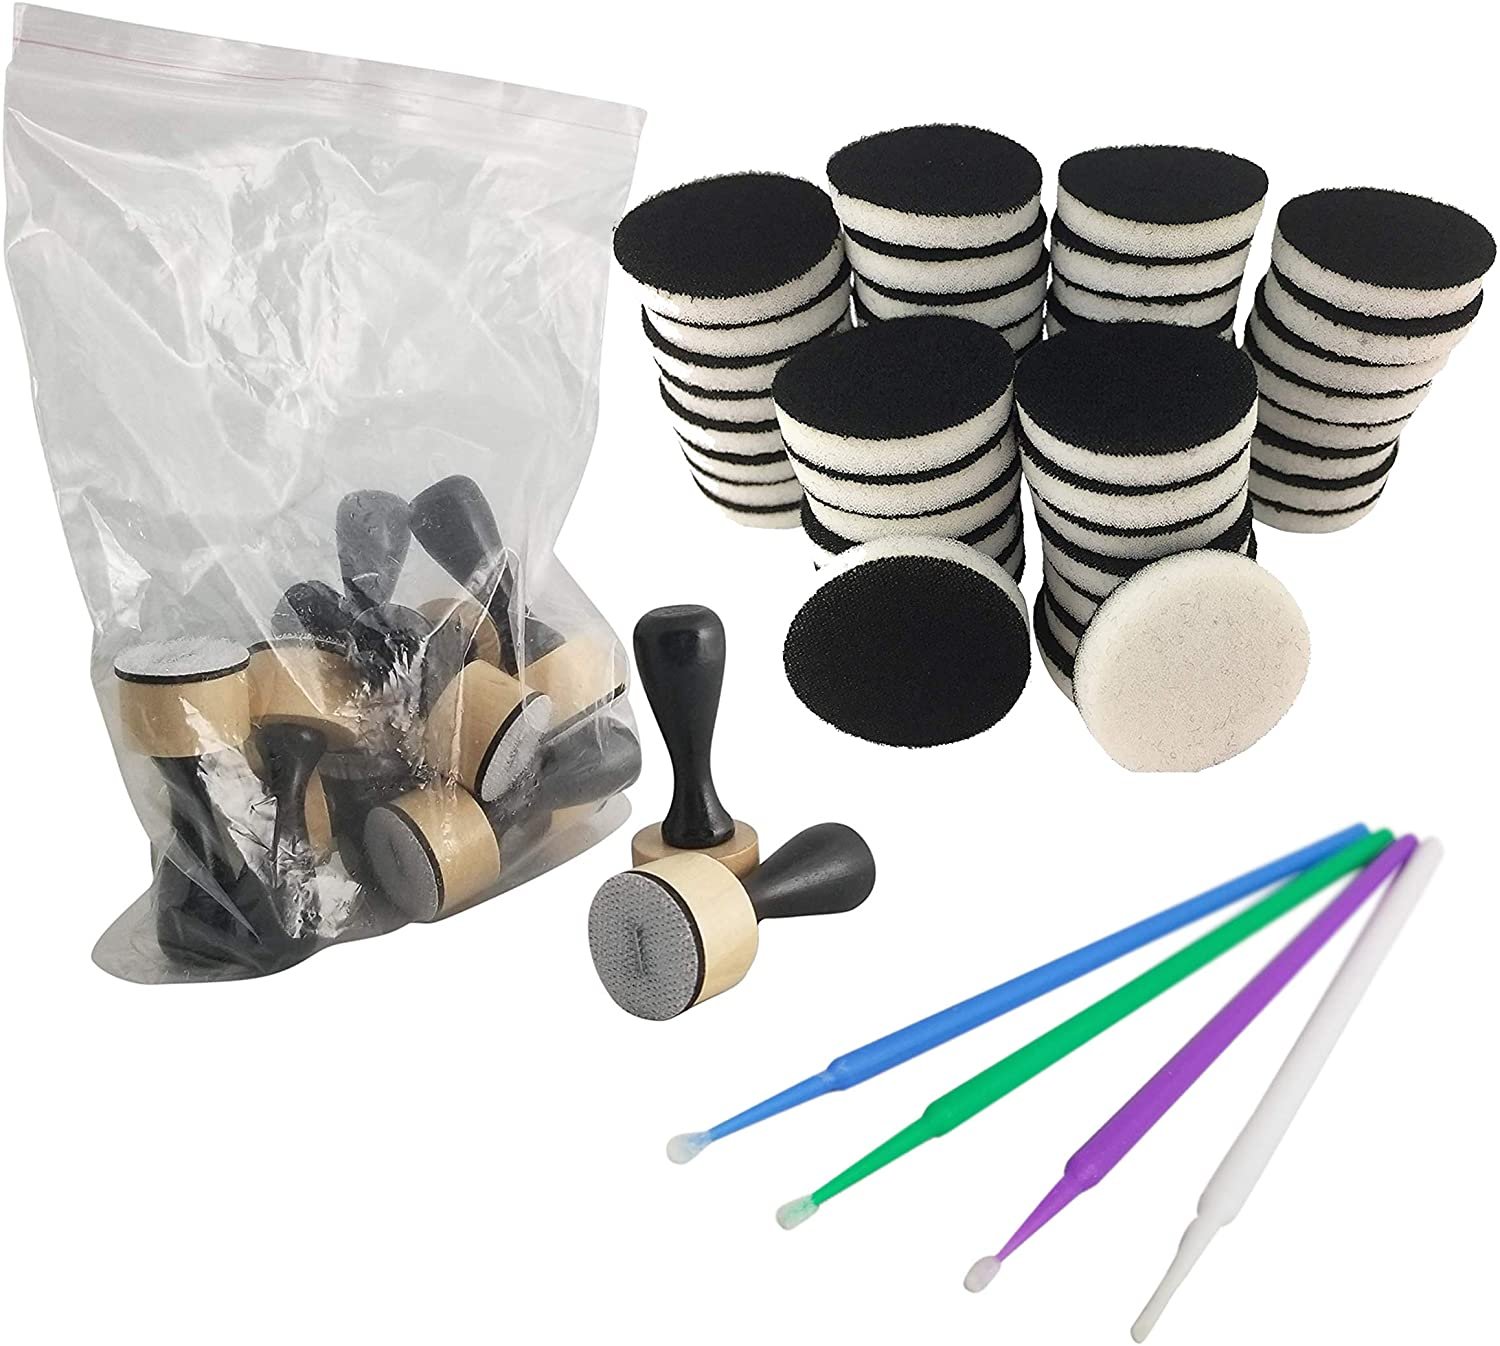 Tim Holtz - Ranger - Ink Mini Ink Blending Tool Big Pack of 12-1 Inch Ink  Round Blending Replacement Foams, Mini, 50-Pack 